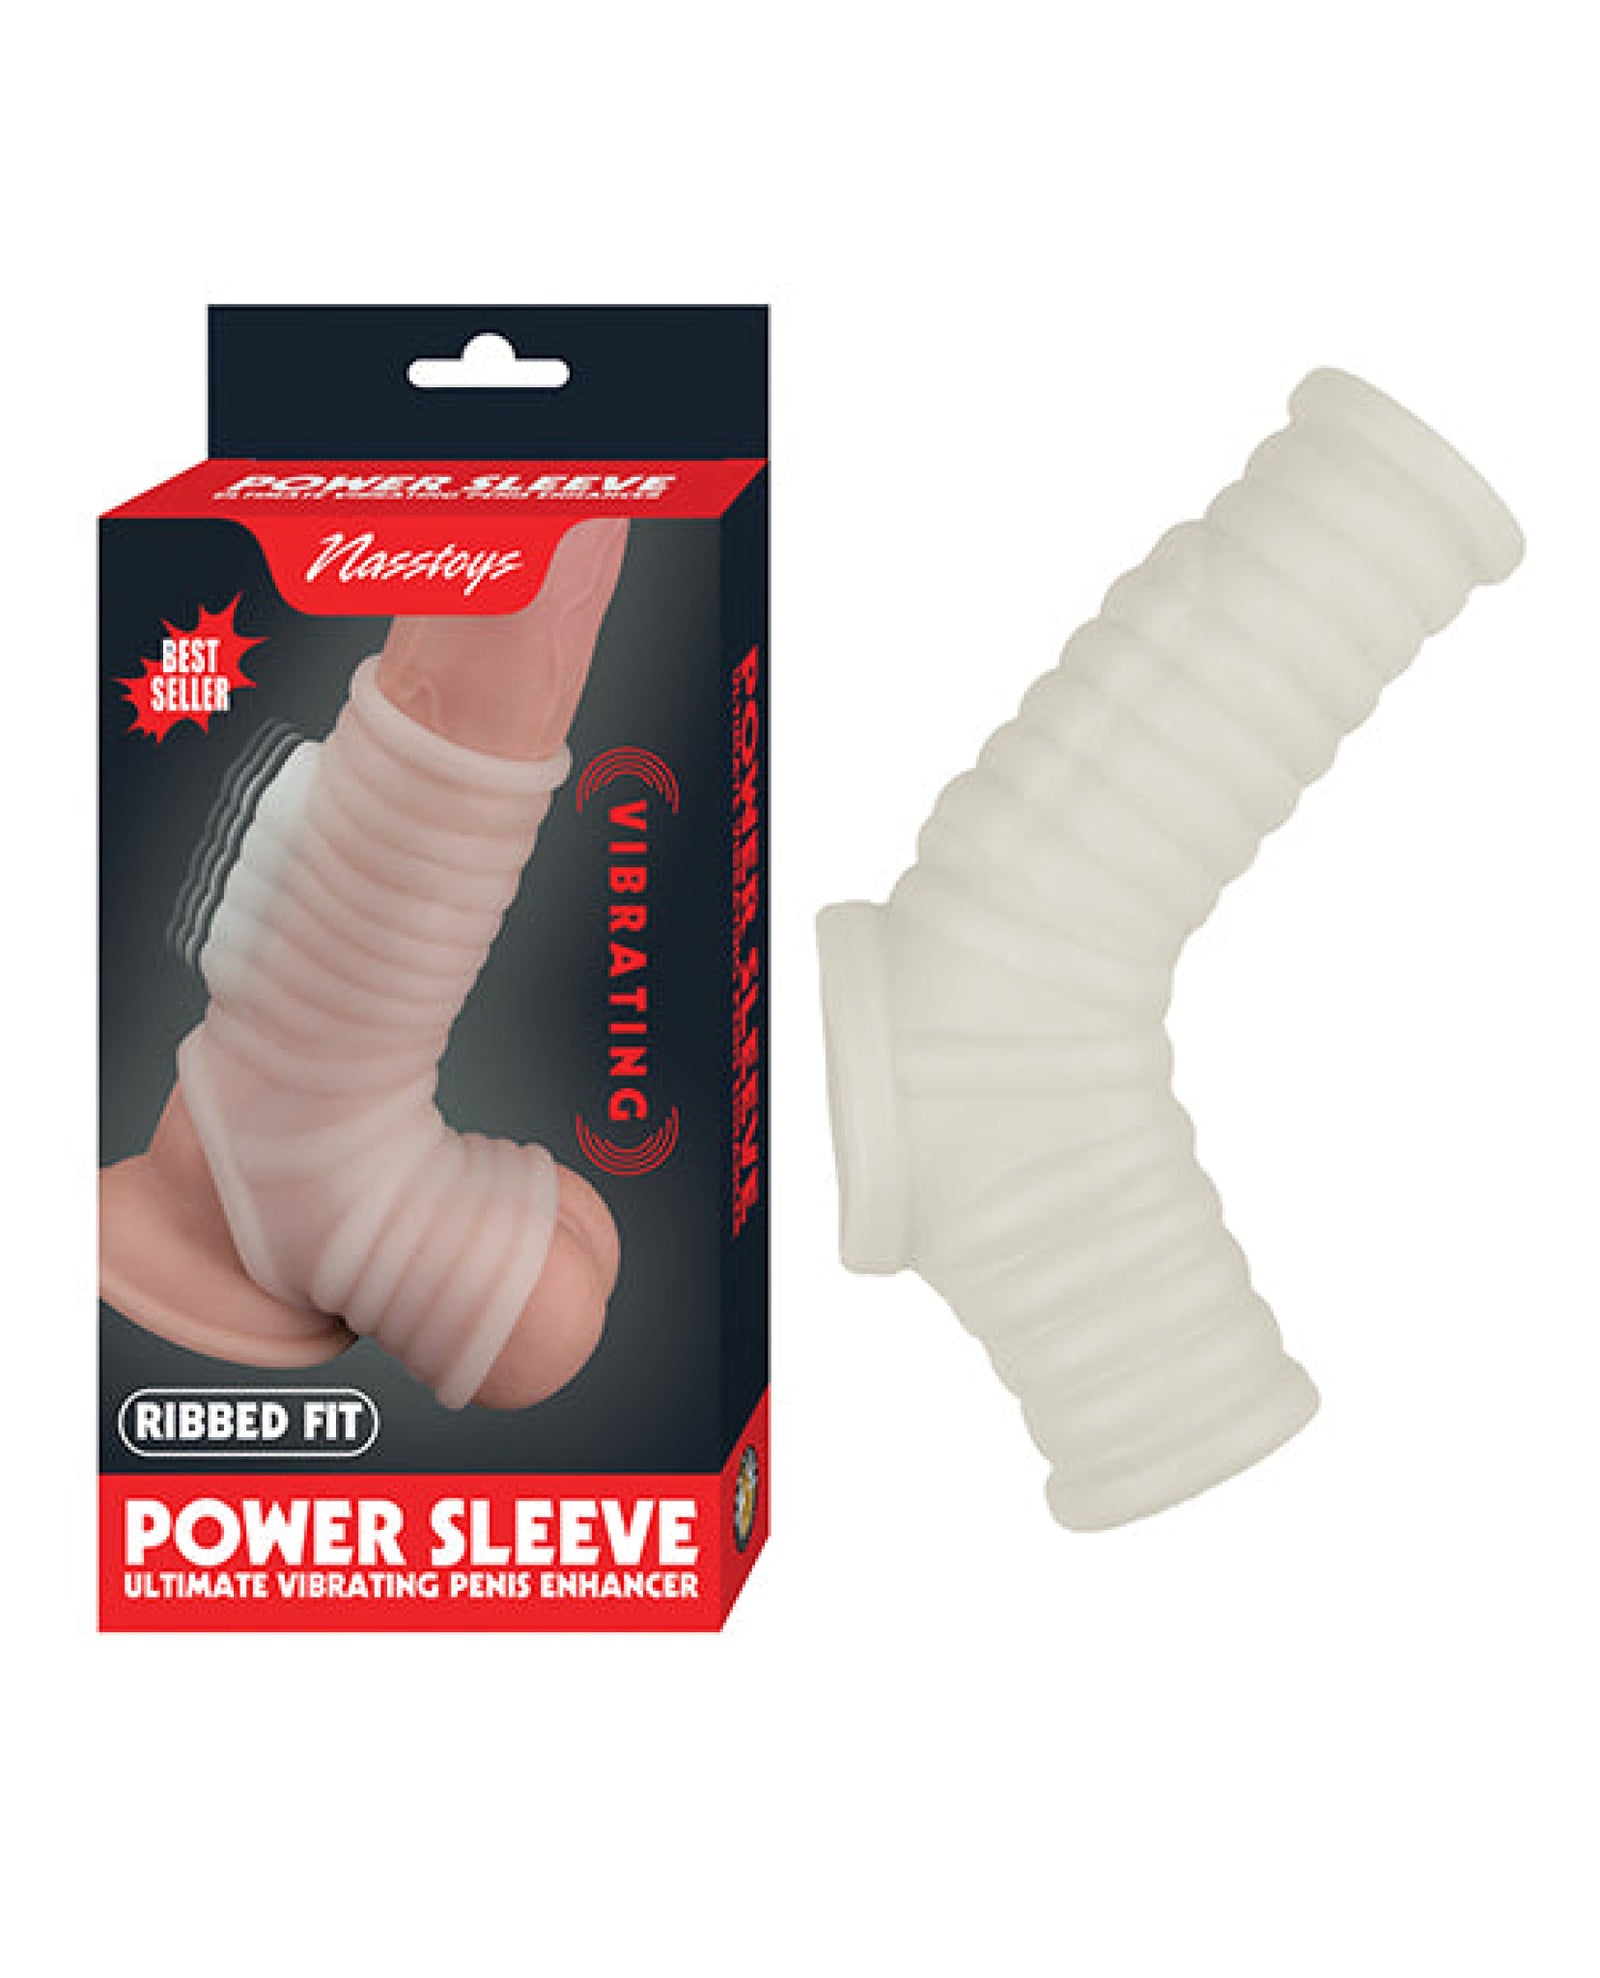 Vibrating Power Sleeve Ribbed Fit Nasstoys